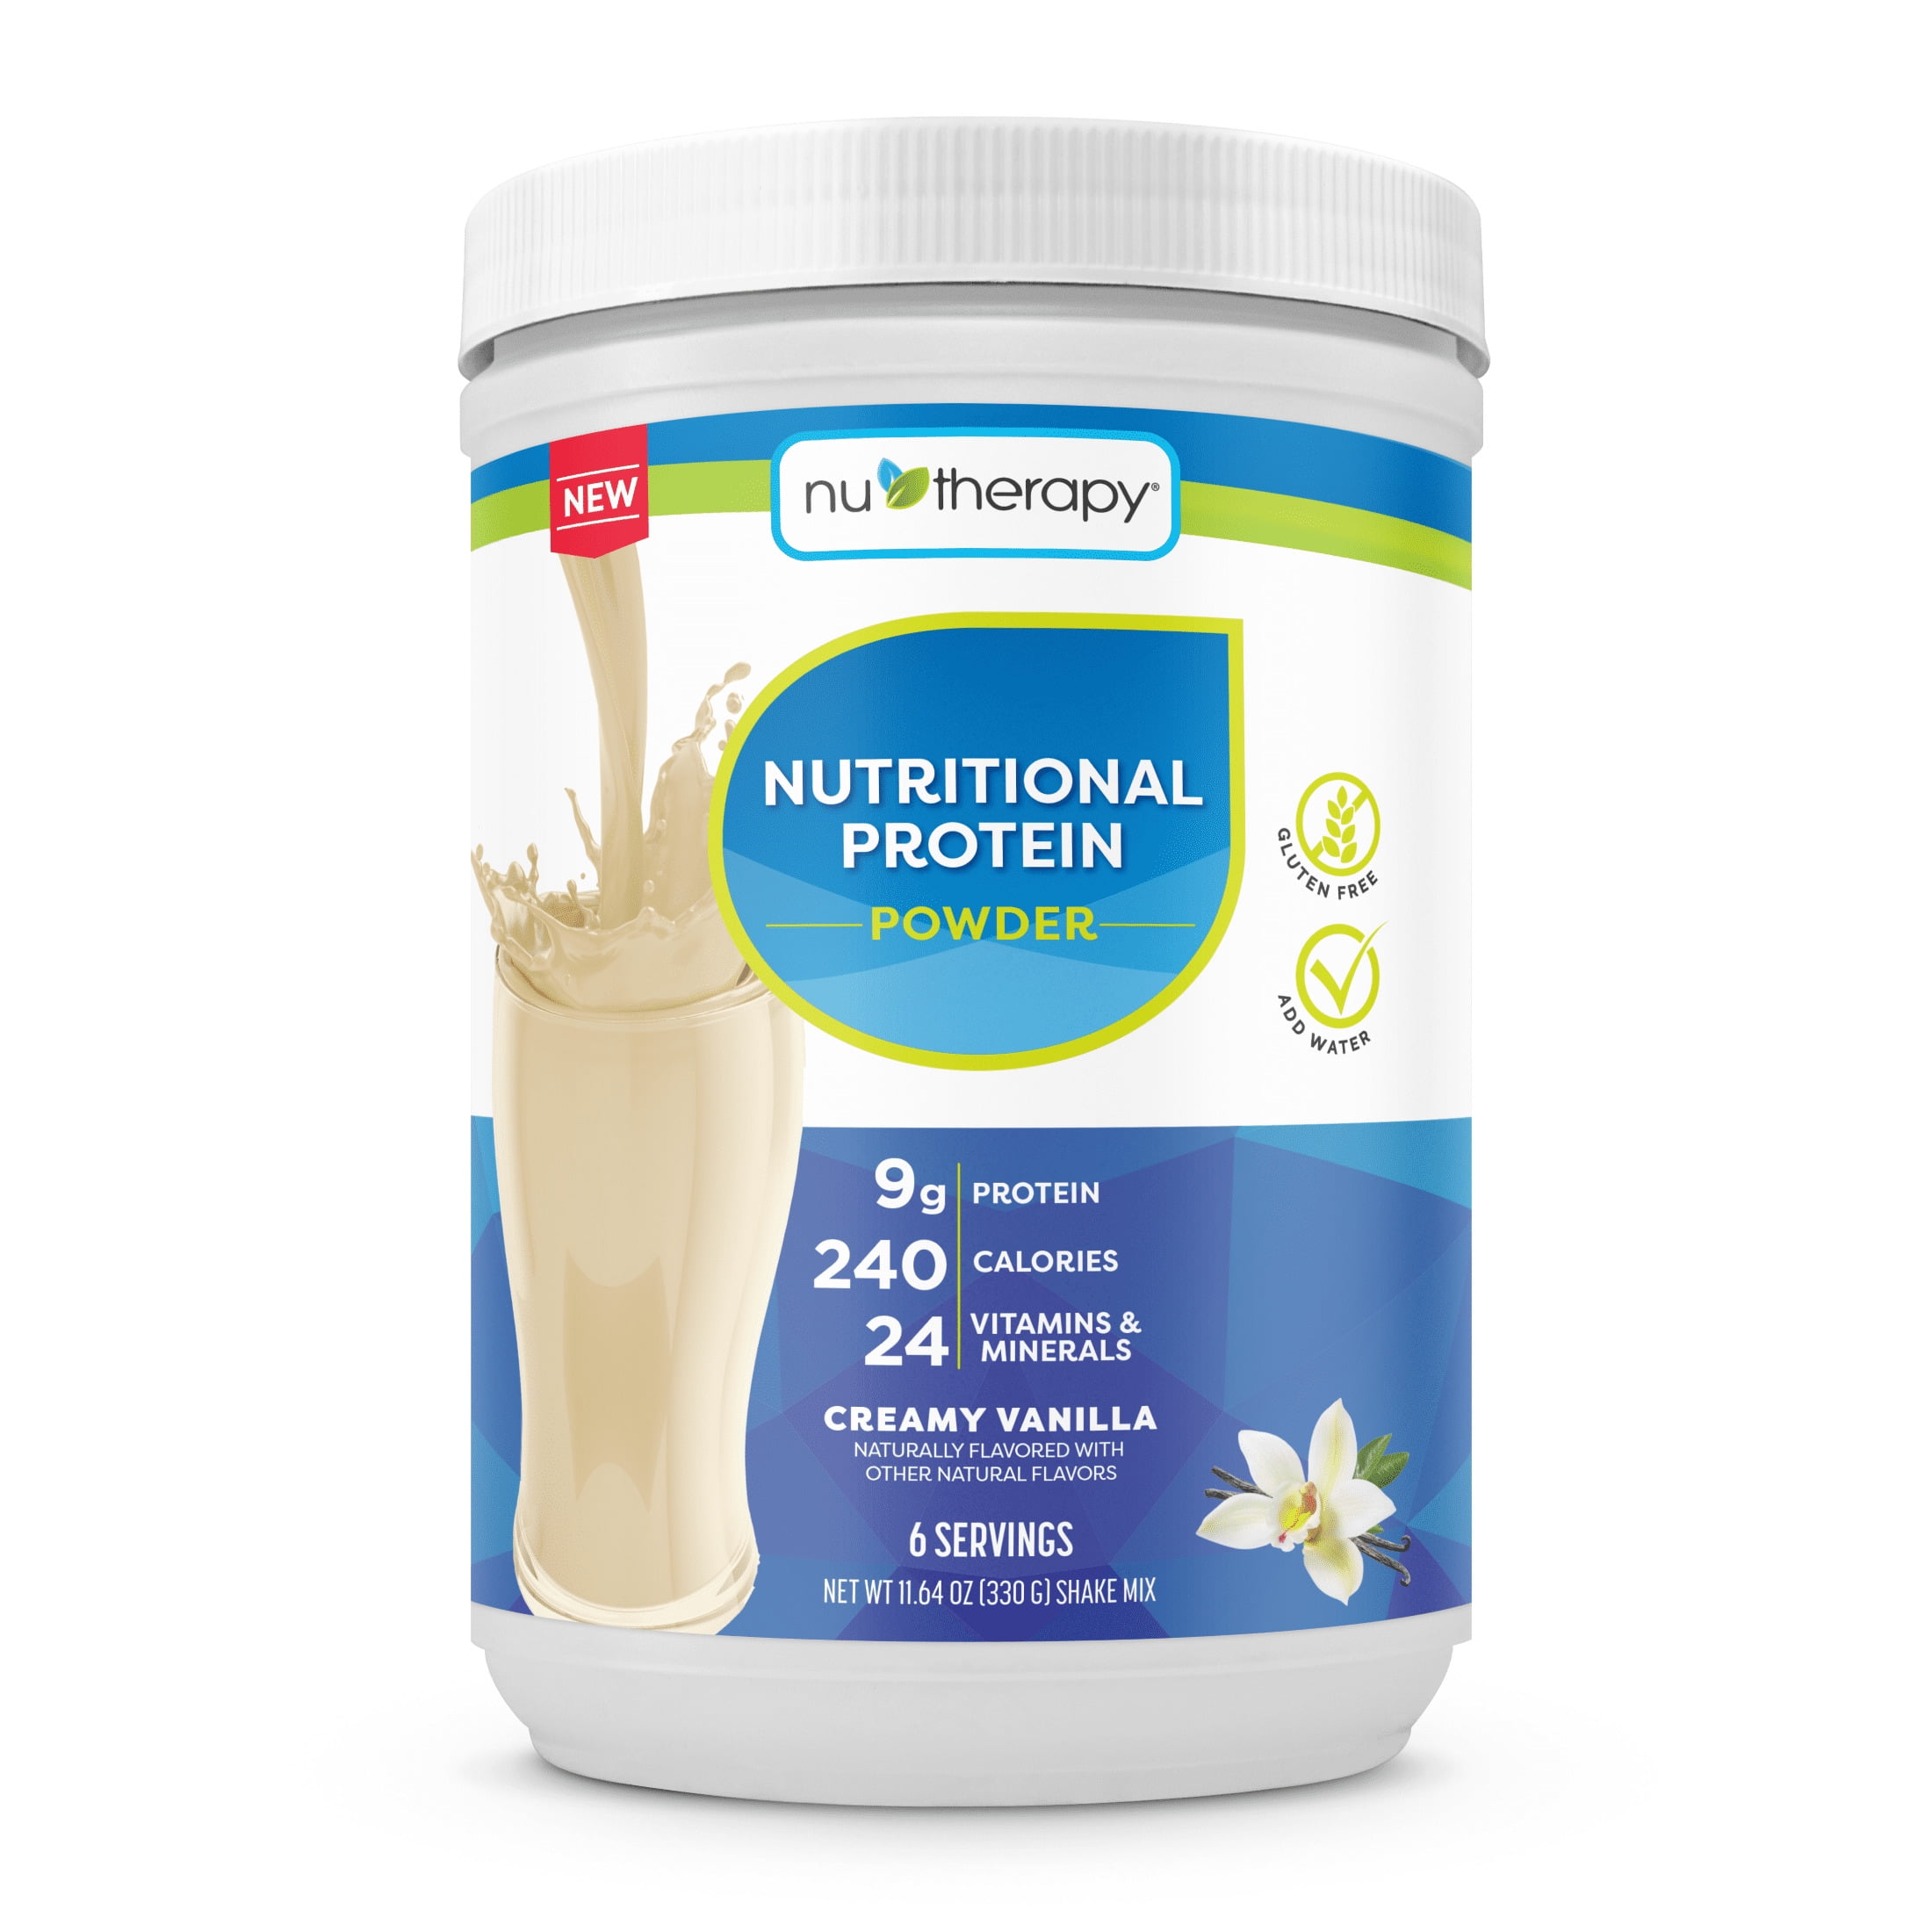 Nutherapy Nutritional Protein Powder, Creamy Vanilla, 330G, 6 Servings, Size: 11.64 oz